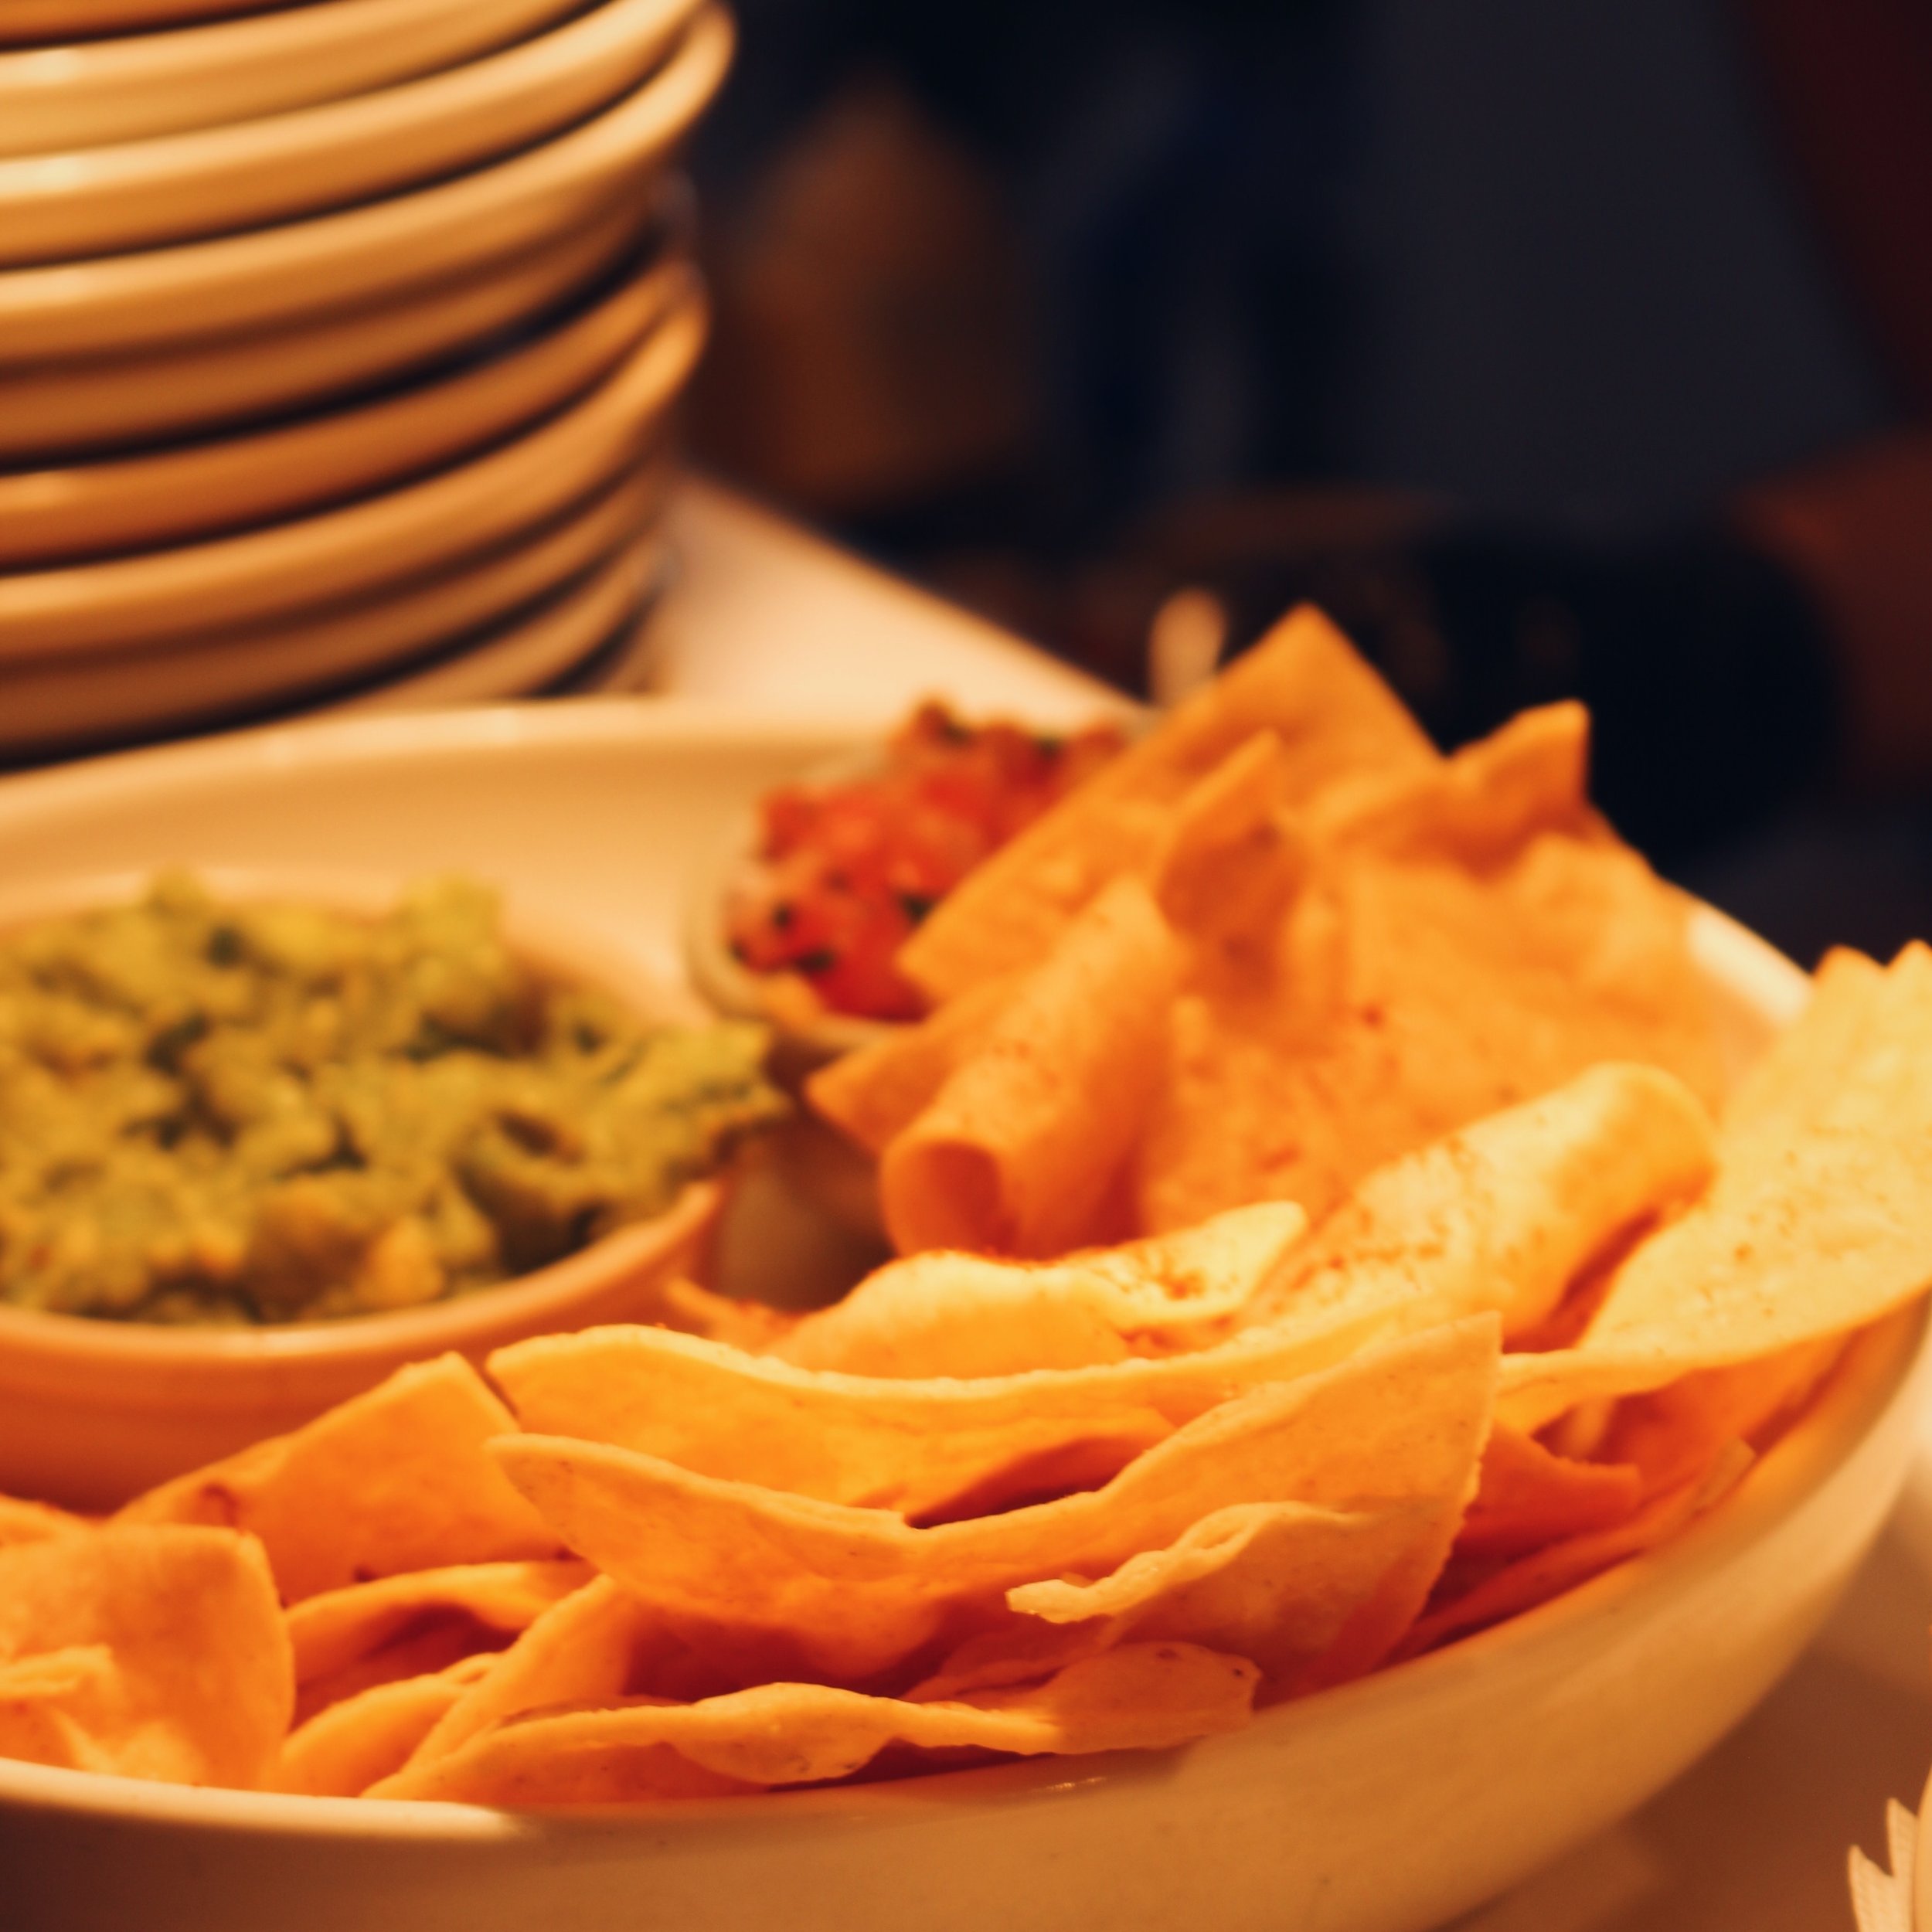 chips &amp; guac 🥑 what more could you want!! 

Open Wednesday to Saturday for Lunch anddddd Dinner! 🥘

#187cantina #cantina #food #lismore #lismorefood #restaurant #bar #cocktails #taco #tacos